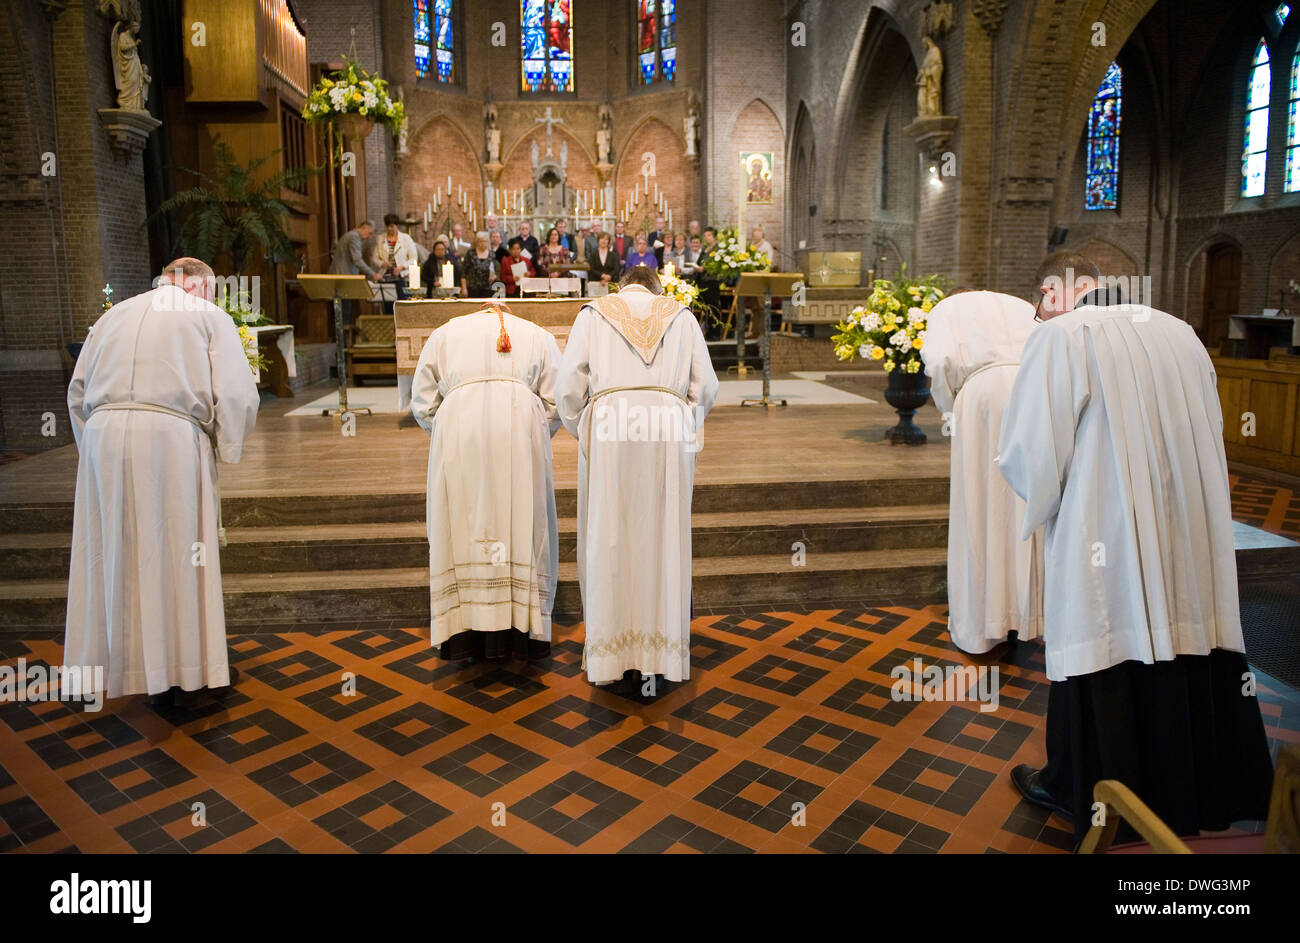 A priest, a cardinal with their helpers are bowing towards the altar at the end of a mass in the catholic church Stock Photo